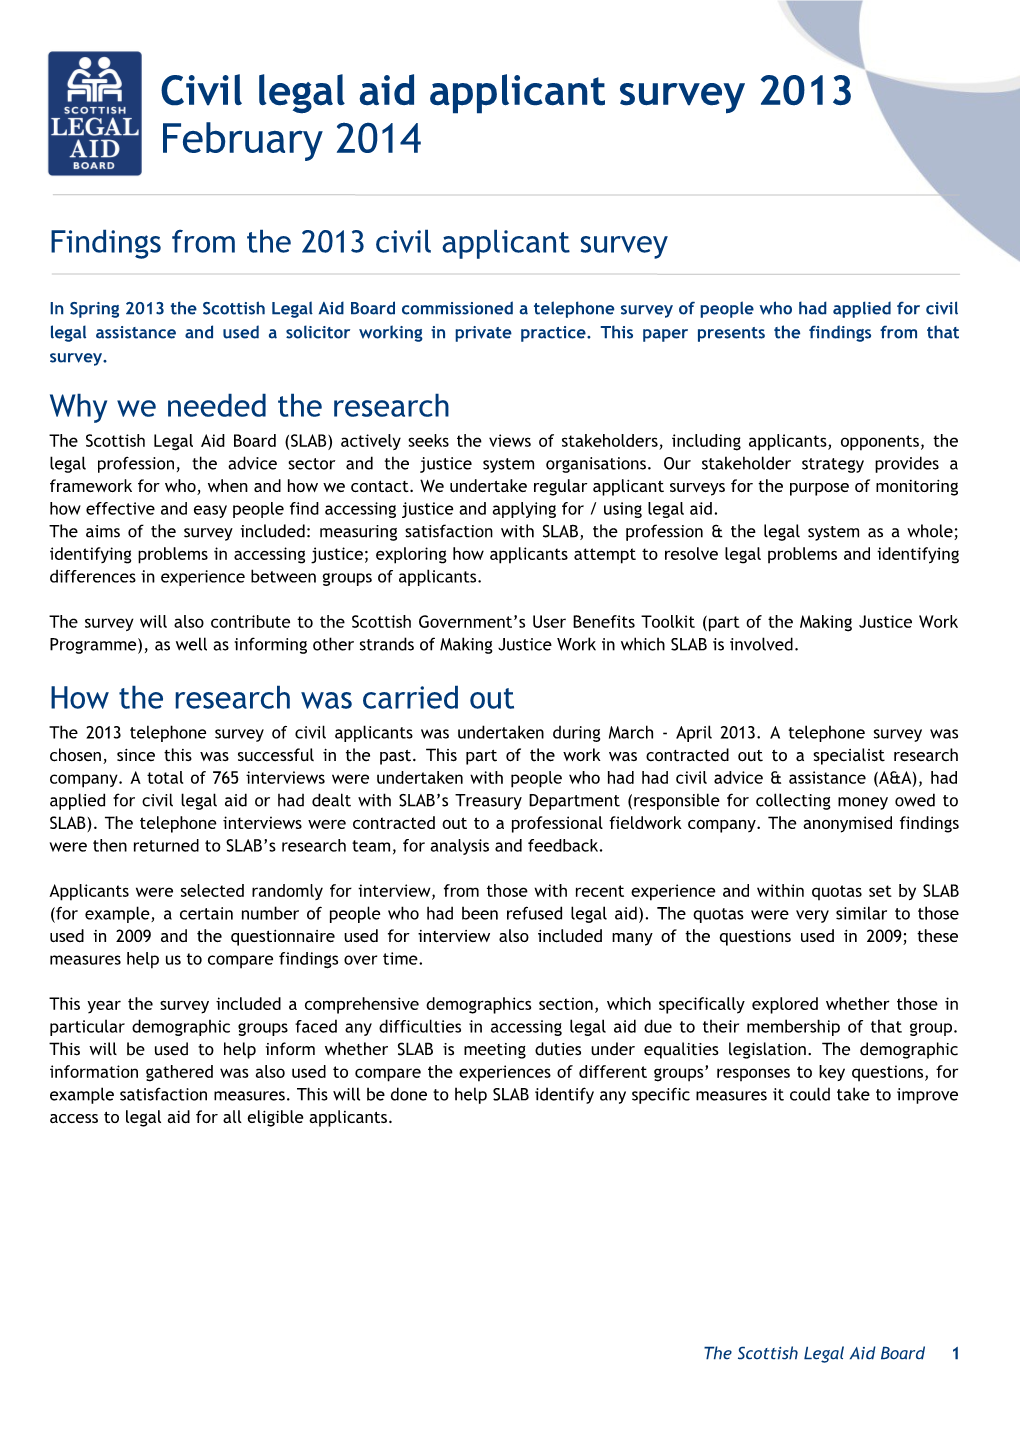 Findings from the 2013 Civil Applicant Survey